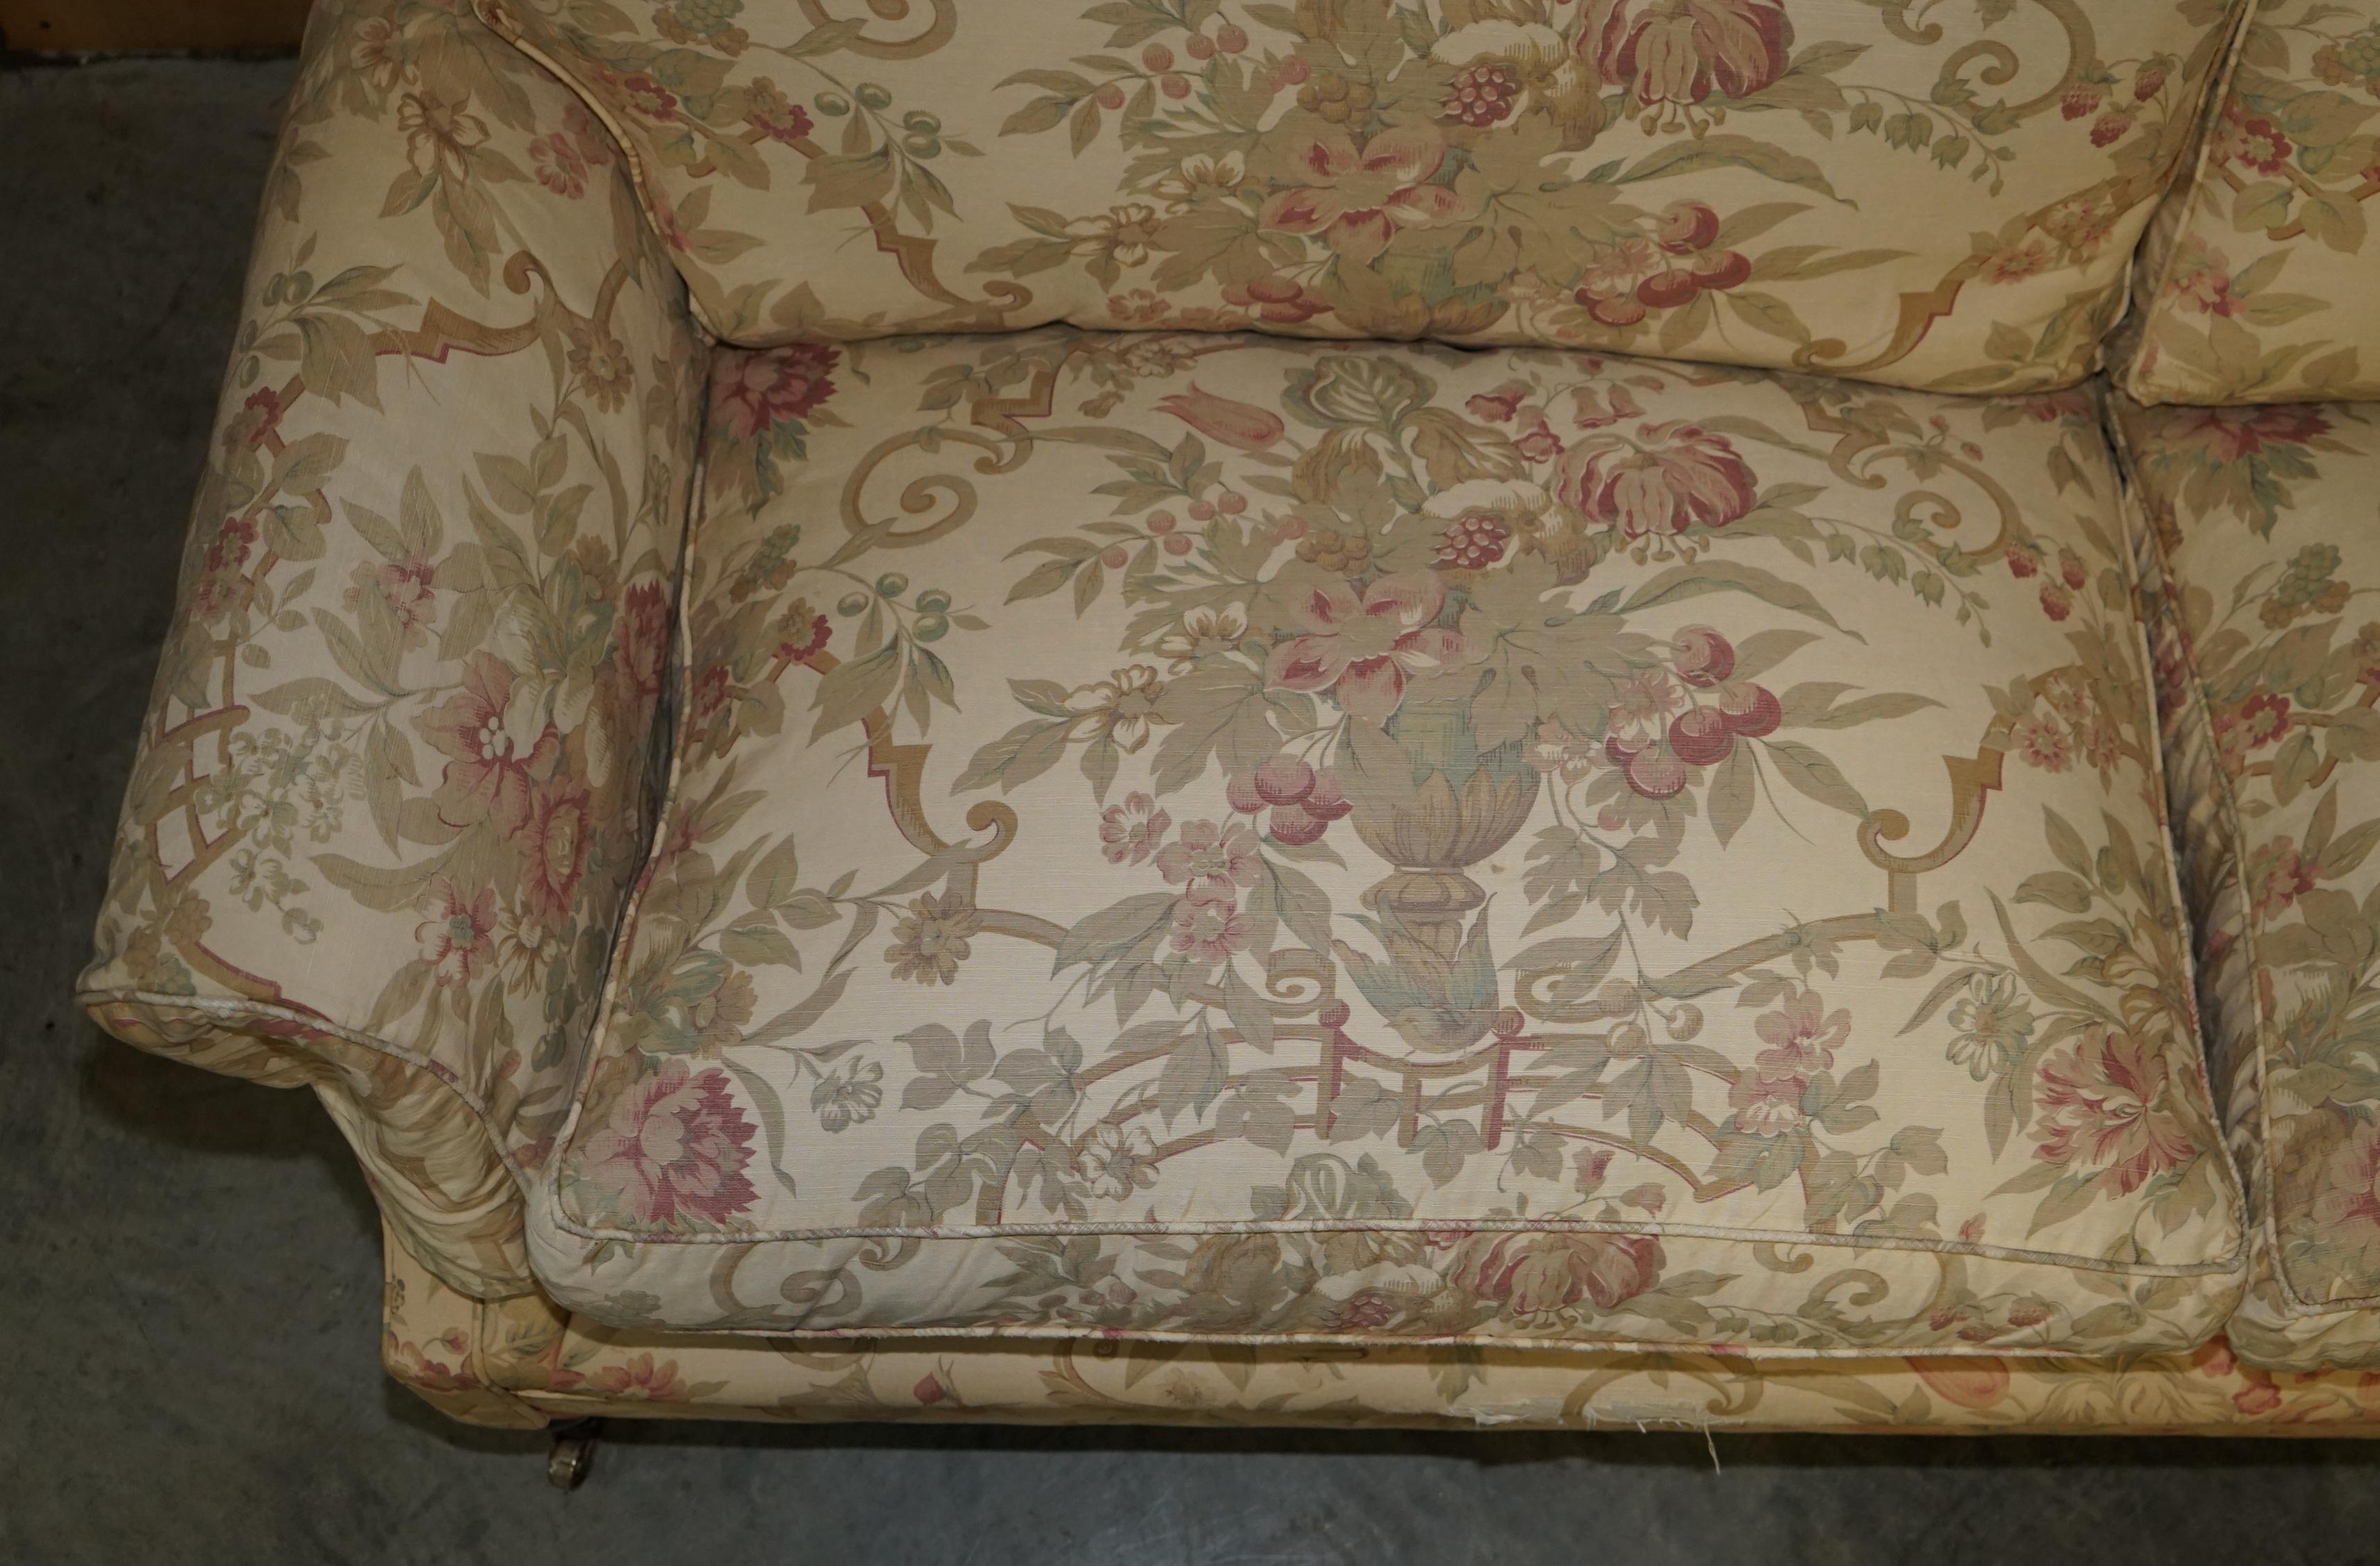 GEORGE SMITH CHELSEA 3 SEAT SOFA IN ORIGINAL UPHOLSTERY PART SUiTE For Sale 3